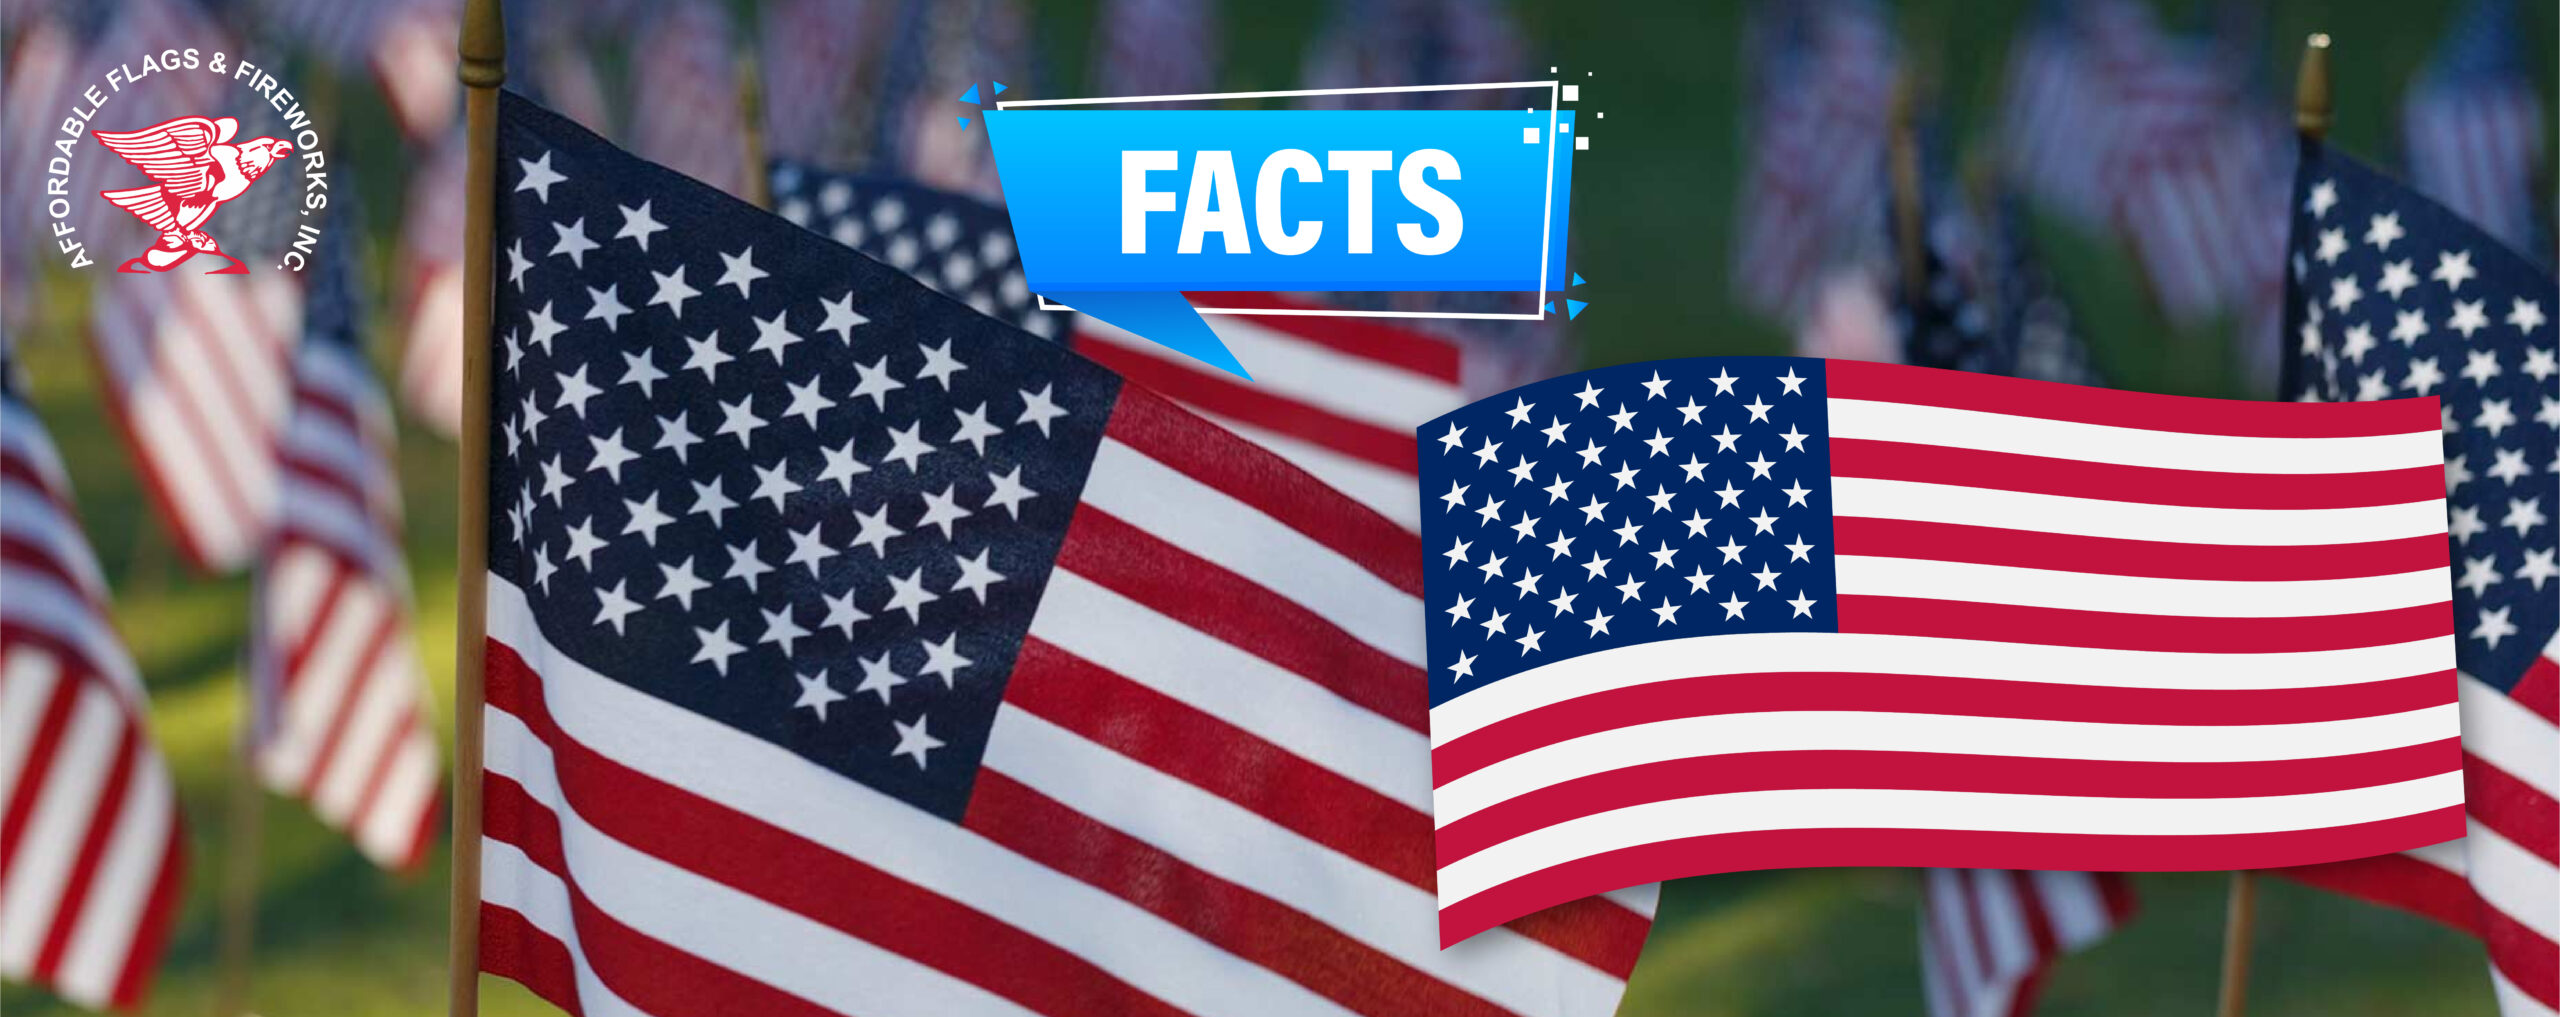 american-flags-with-focused-inscription-of-facts